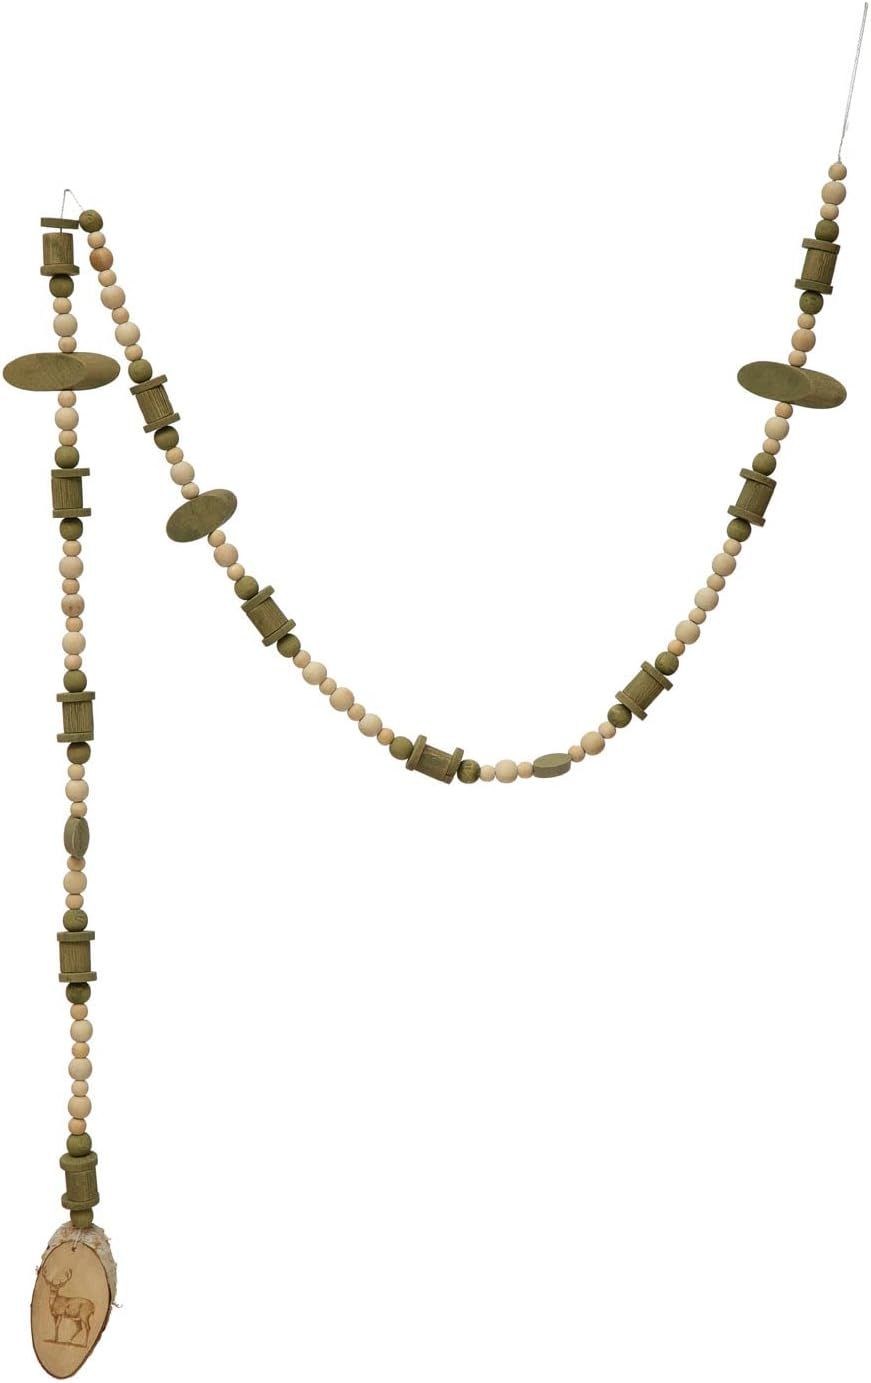 Creative Co-Op Paulownia Wood Bead Garland with Deer Icon, Green and Natural | Amazon (US)